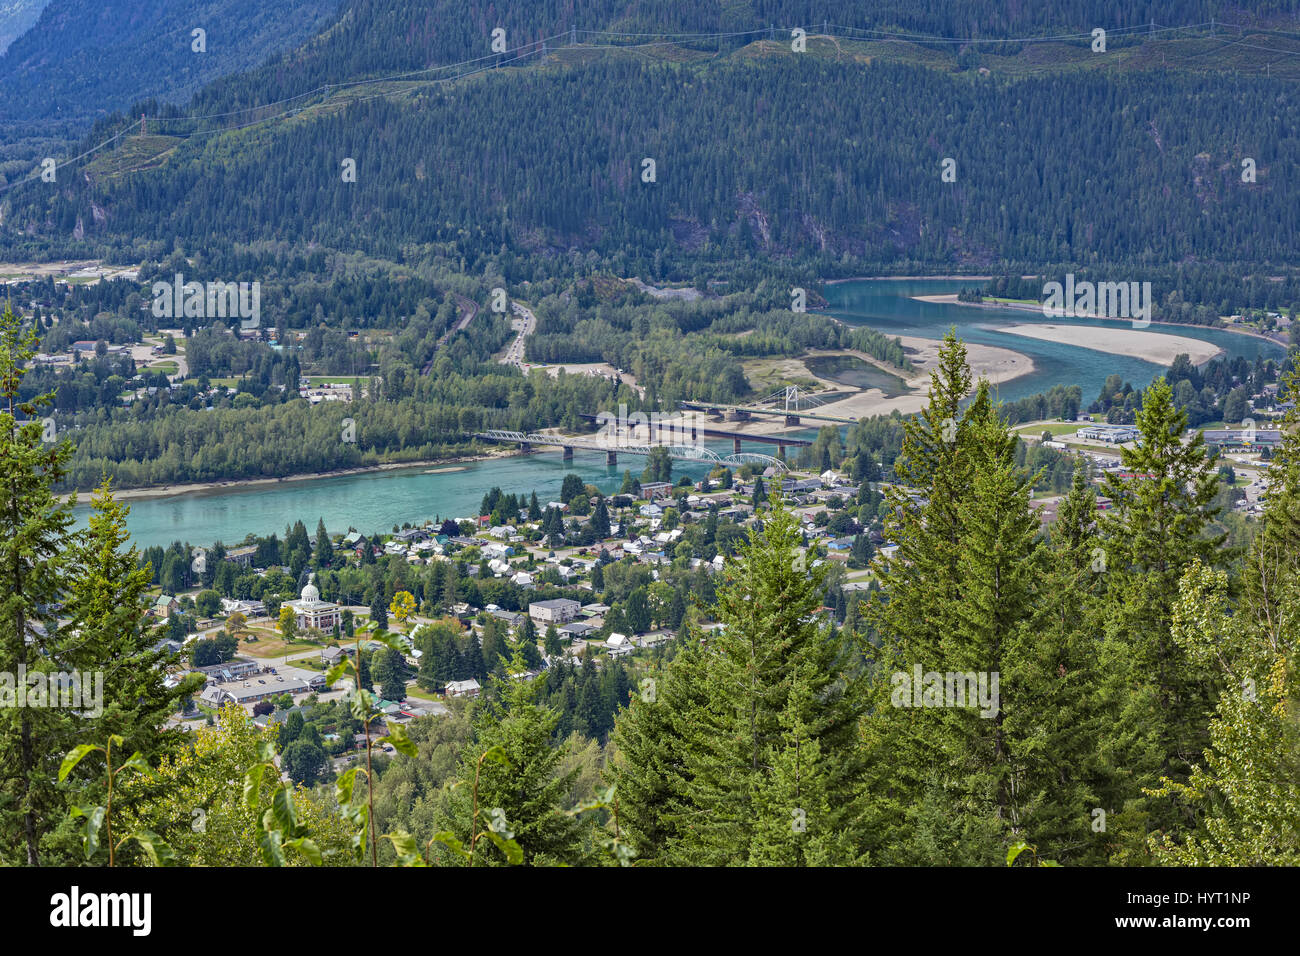 A view of Revelstoke townsite and bridges crossing the Columbia River Revelstoke British Columbia Canada Stock Photo